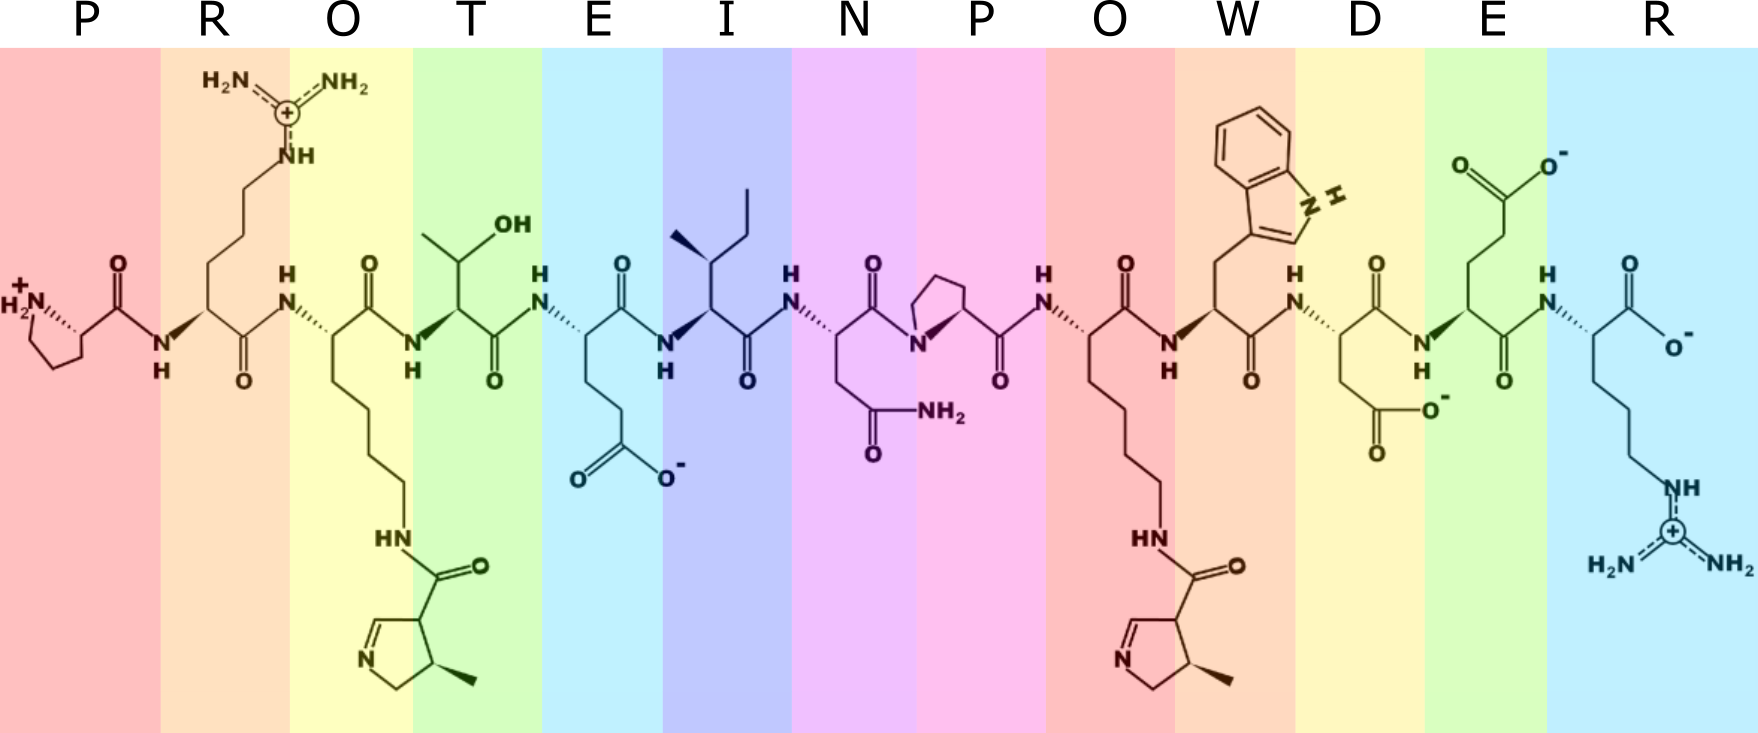 A short peptide chain, with each amino acid on a different colored background. Above the chain are the letters PROTEINPOWDER.